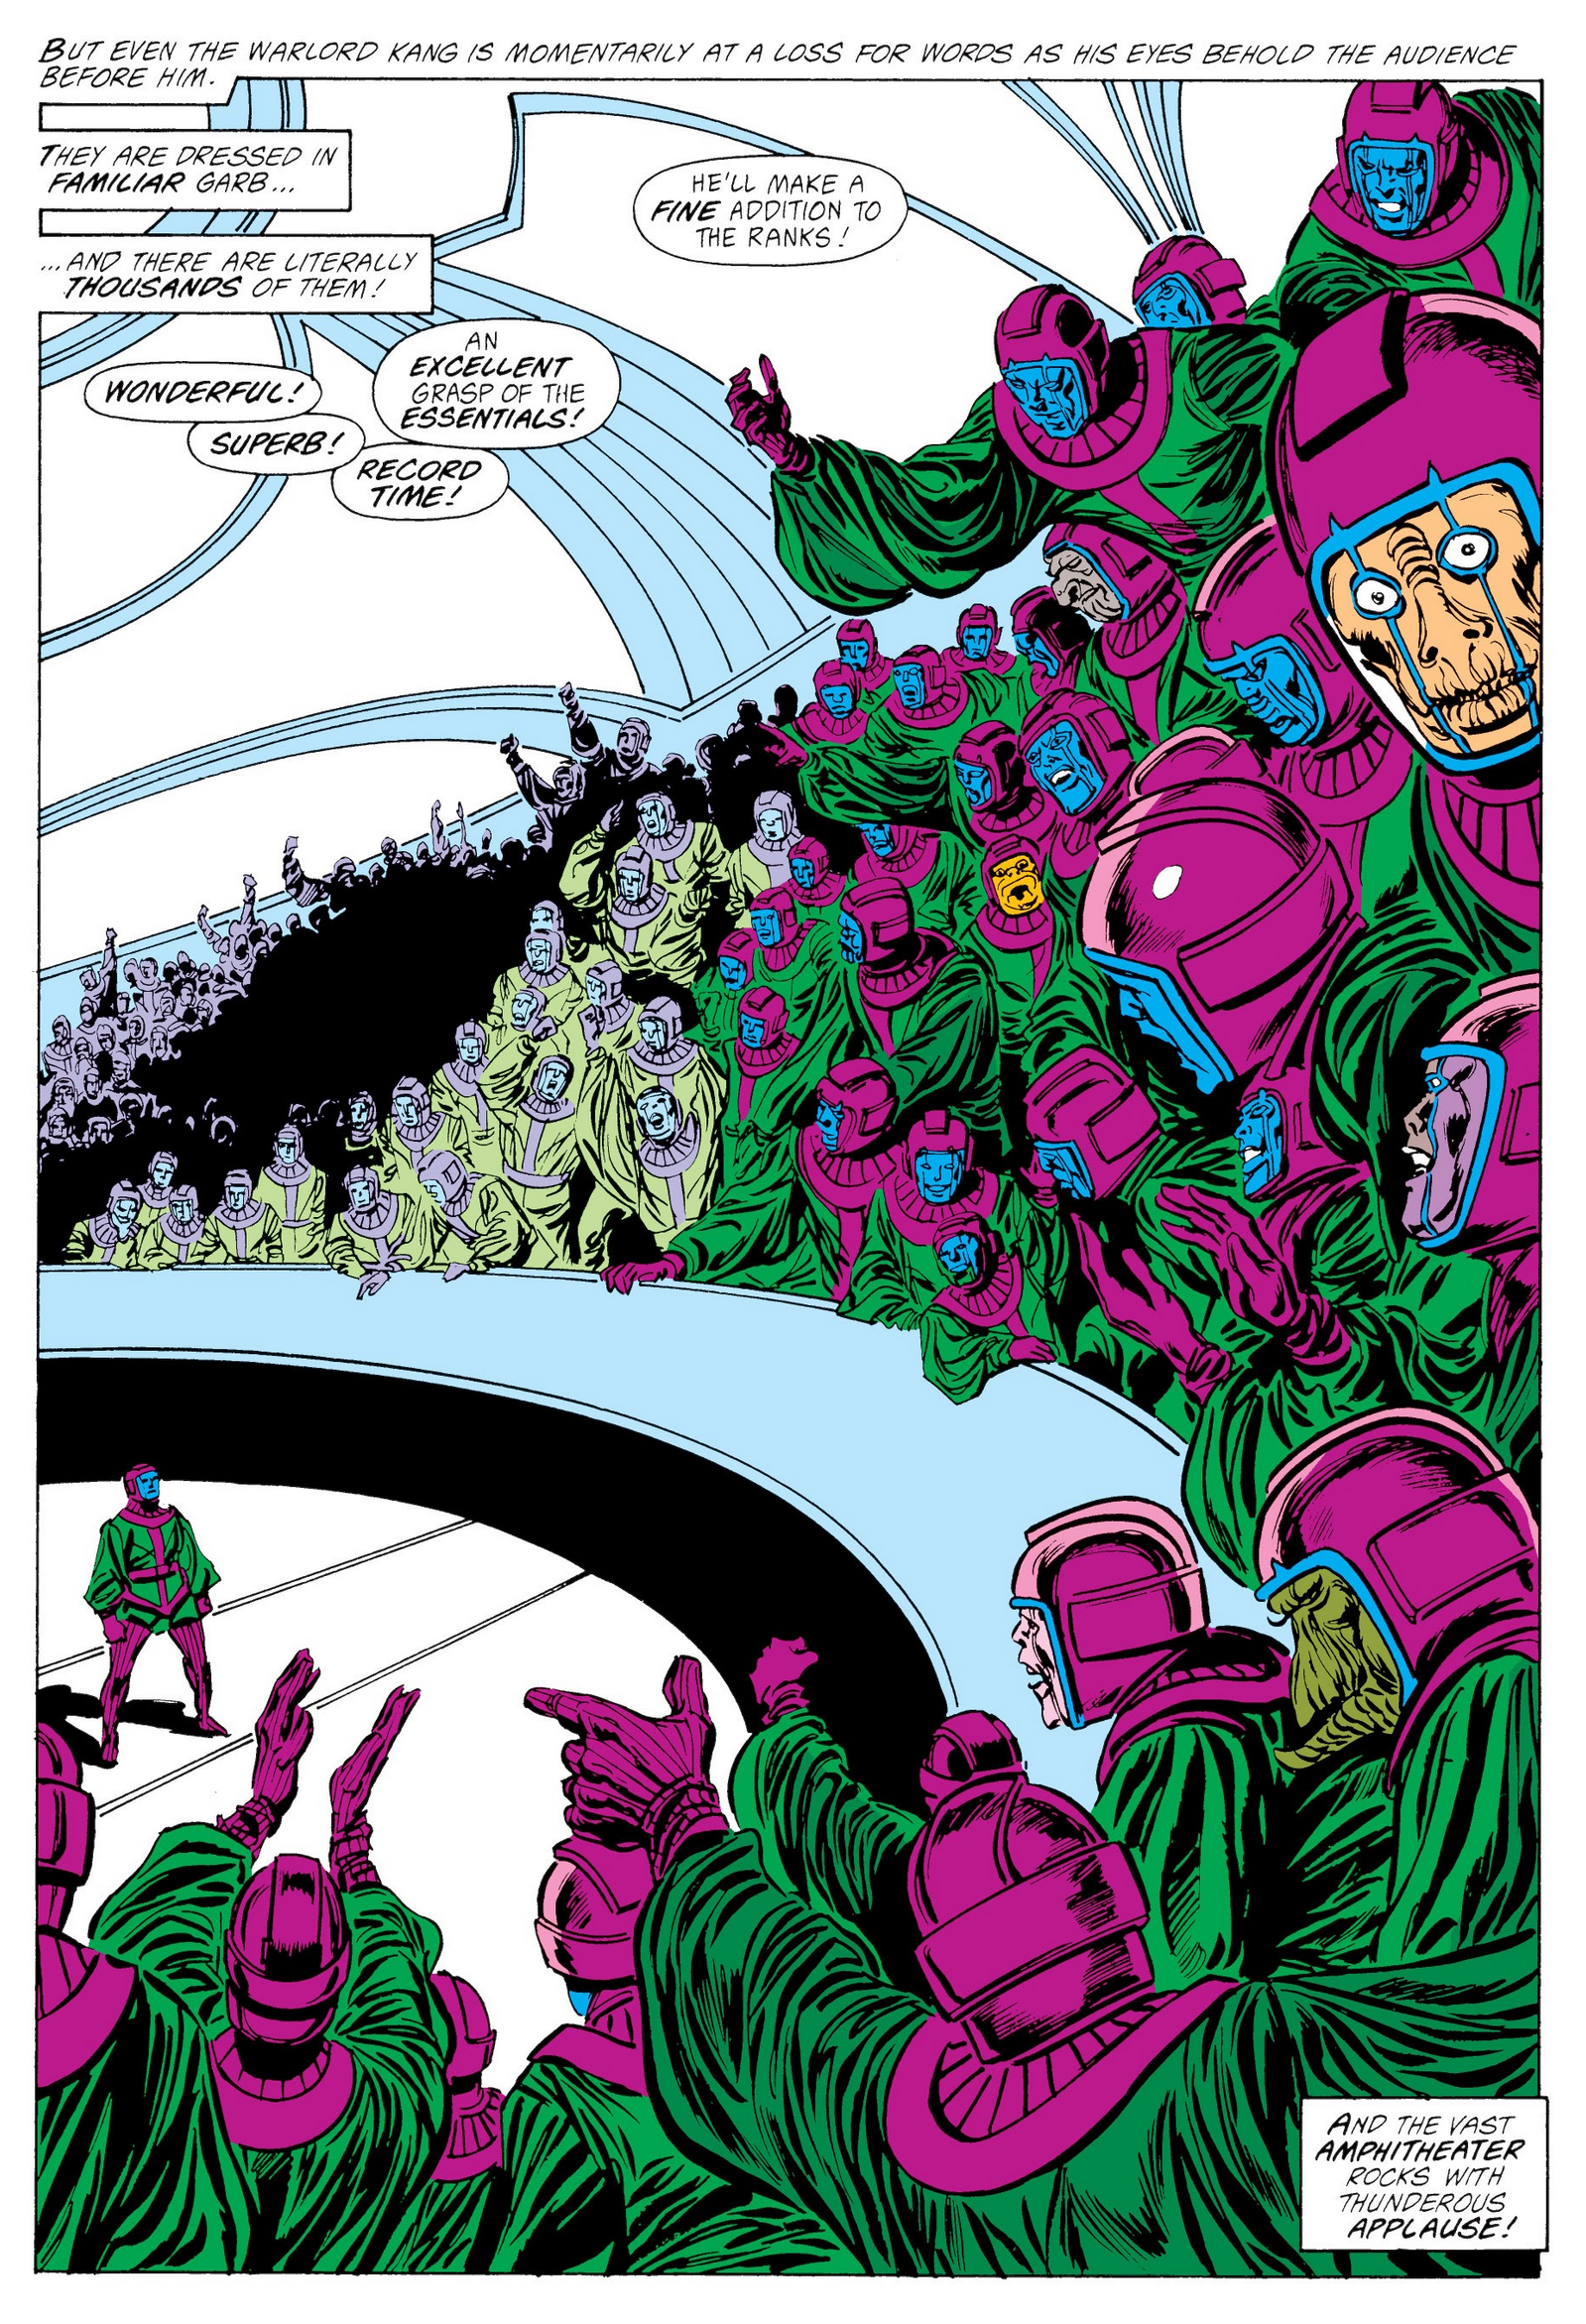 The Council of Cross-Time Kangs makes themselves known in Avengers Vol. 1 #292 "The Dragon in the Sea!" (1988), Marvel Comics. Words by Walter Simonson, art by John Buscema, Tom Palmer, Max Scheele, and Bill Oakley.